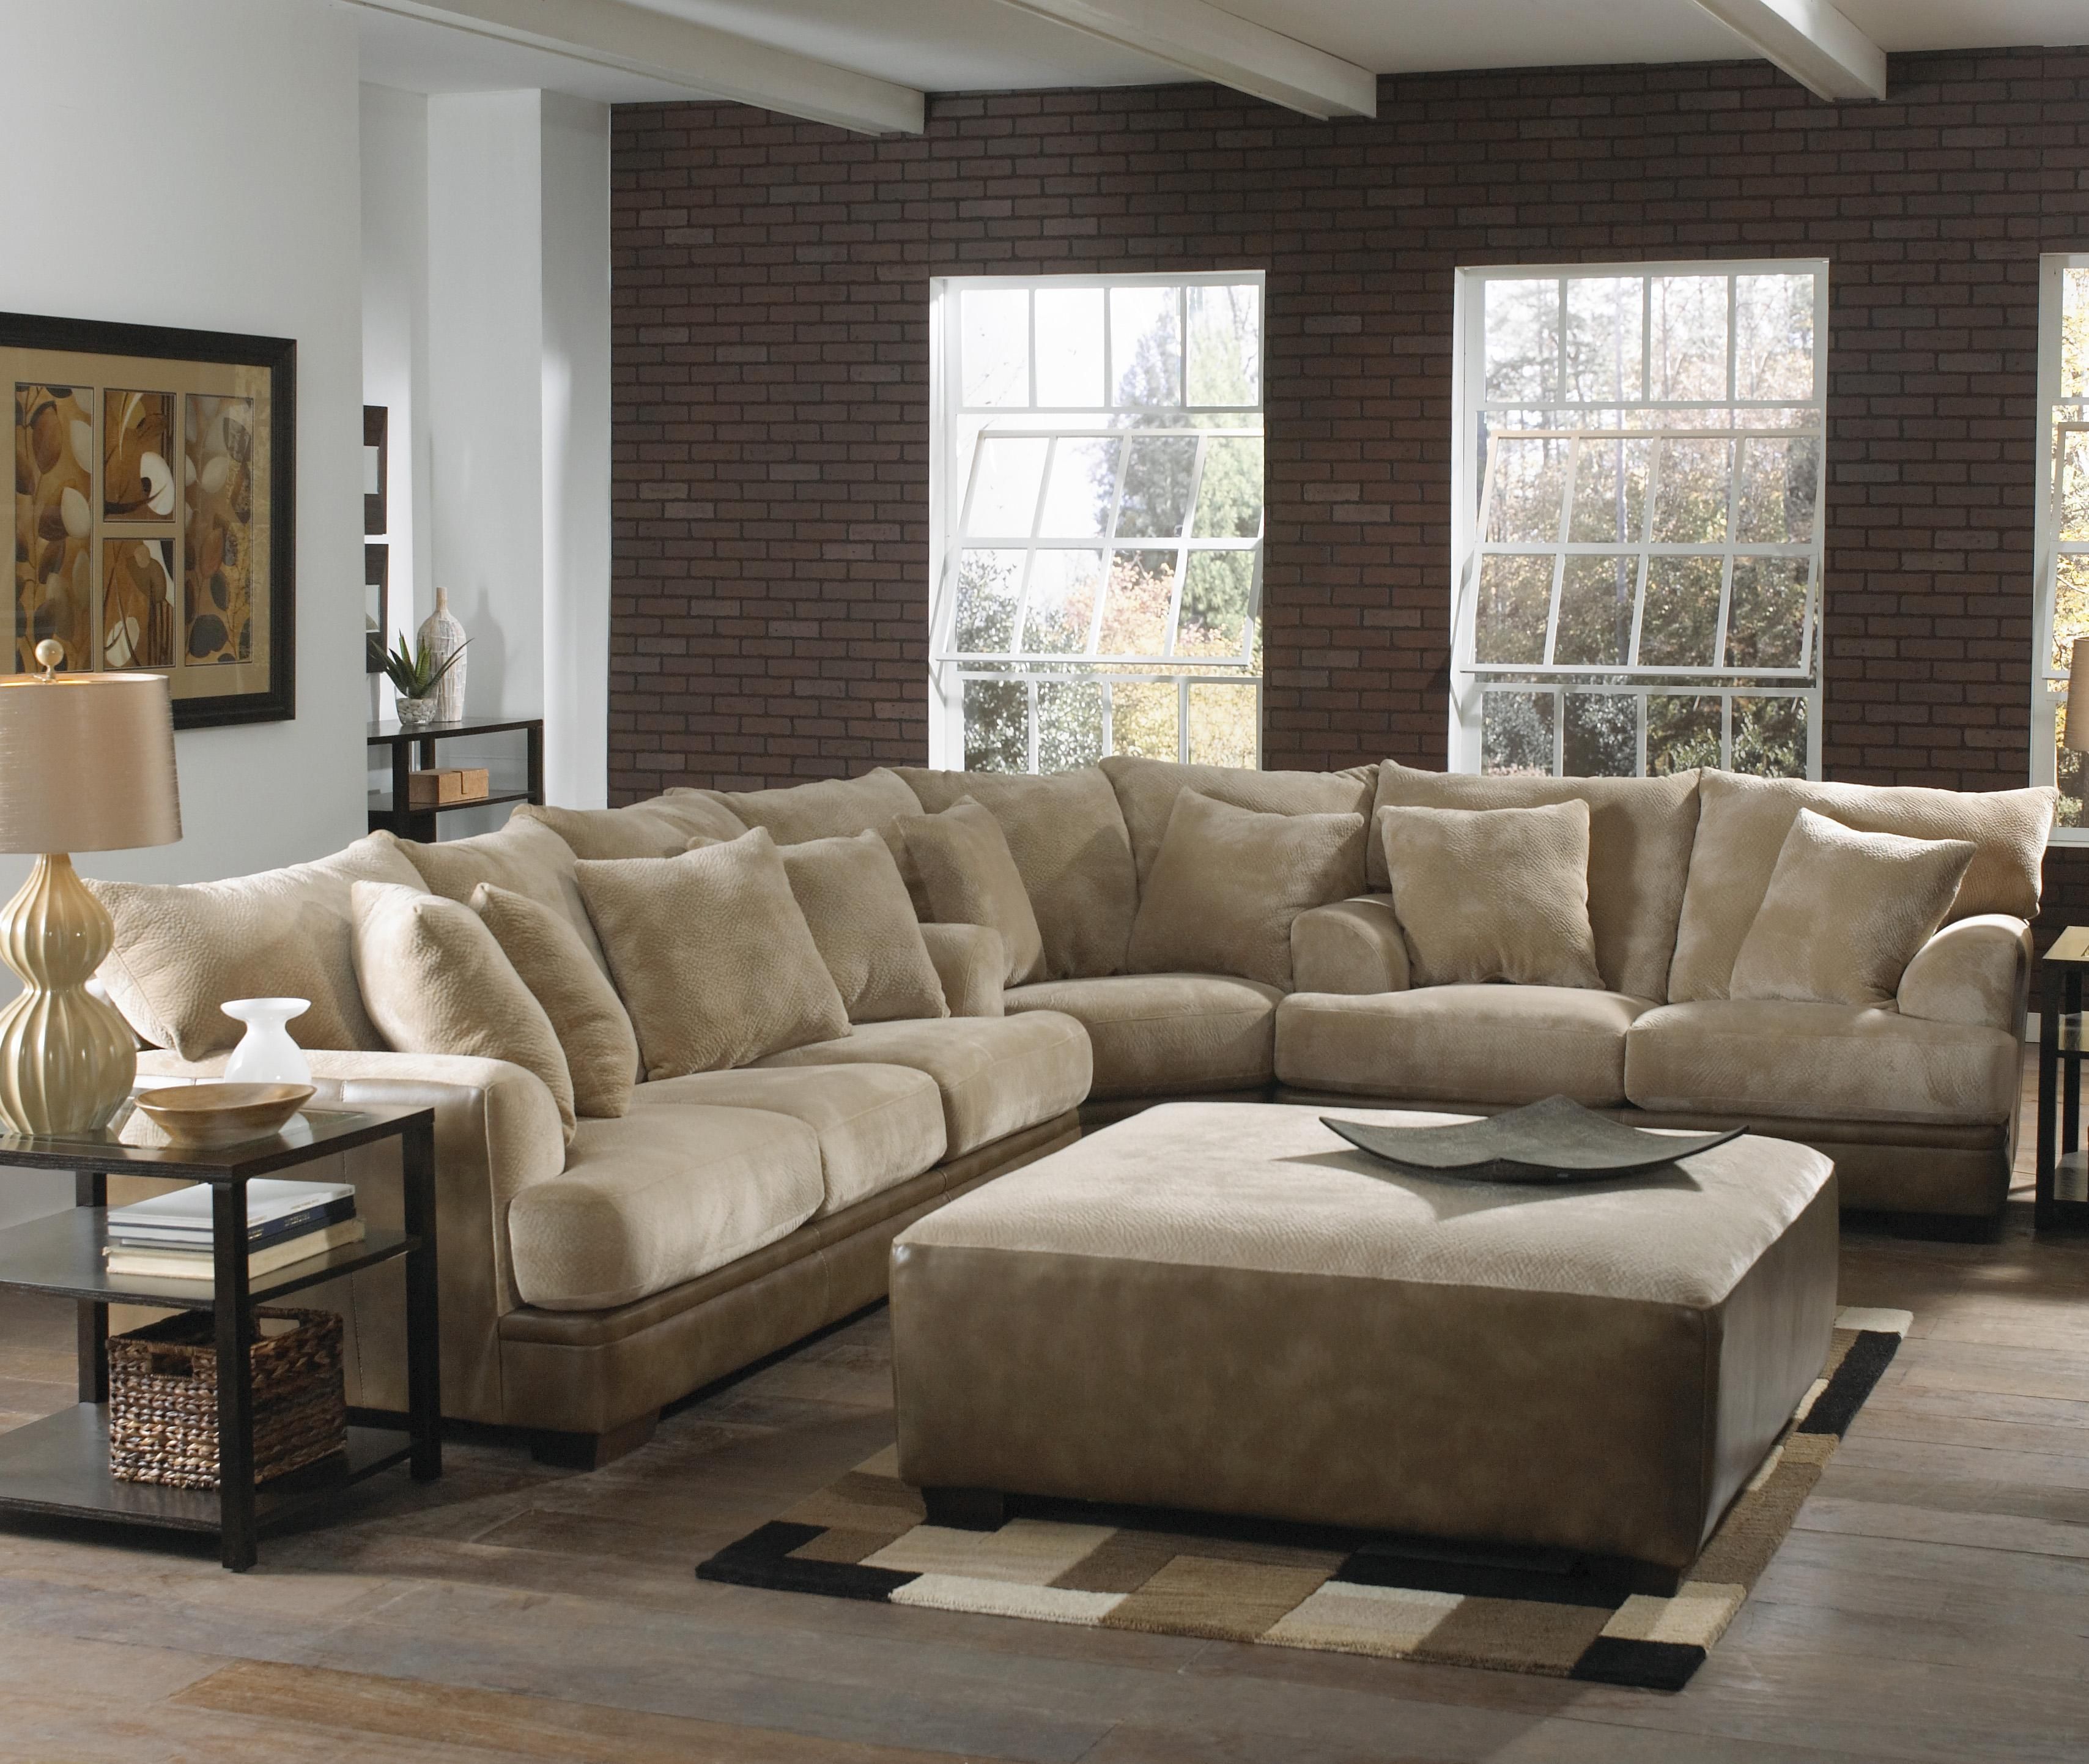 Barkley Large L Shaped Sectional Sofa With Right Side Loveseat Regarding Extra Large Sectional Sofas (View 6 of 12)